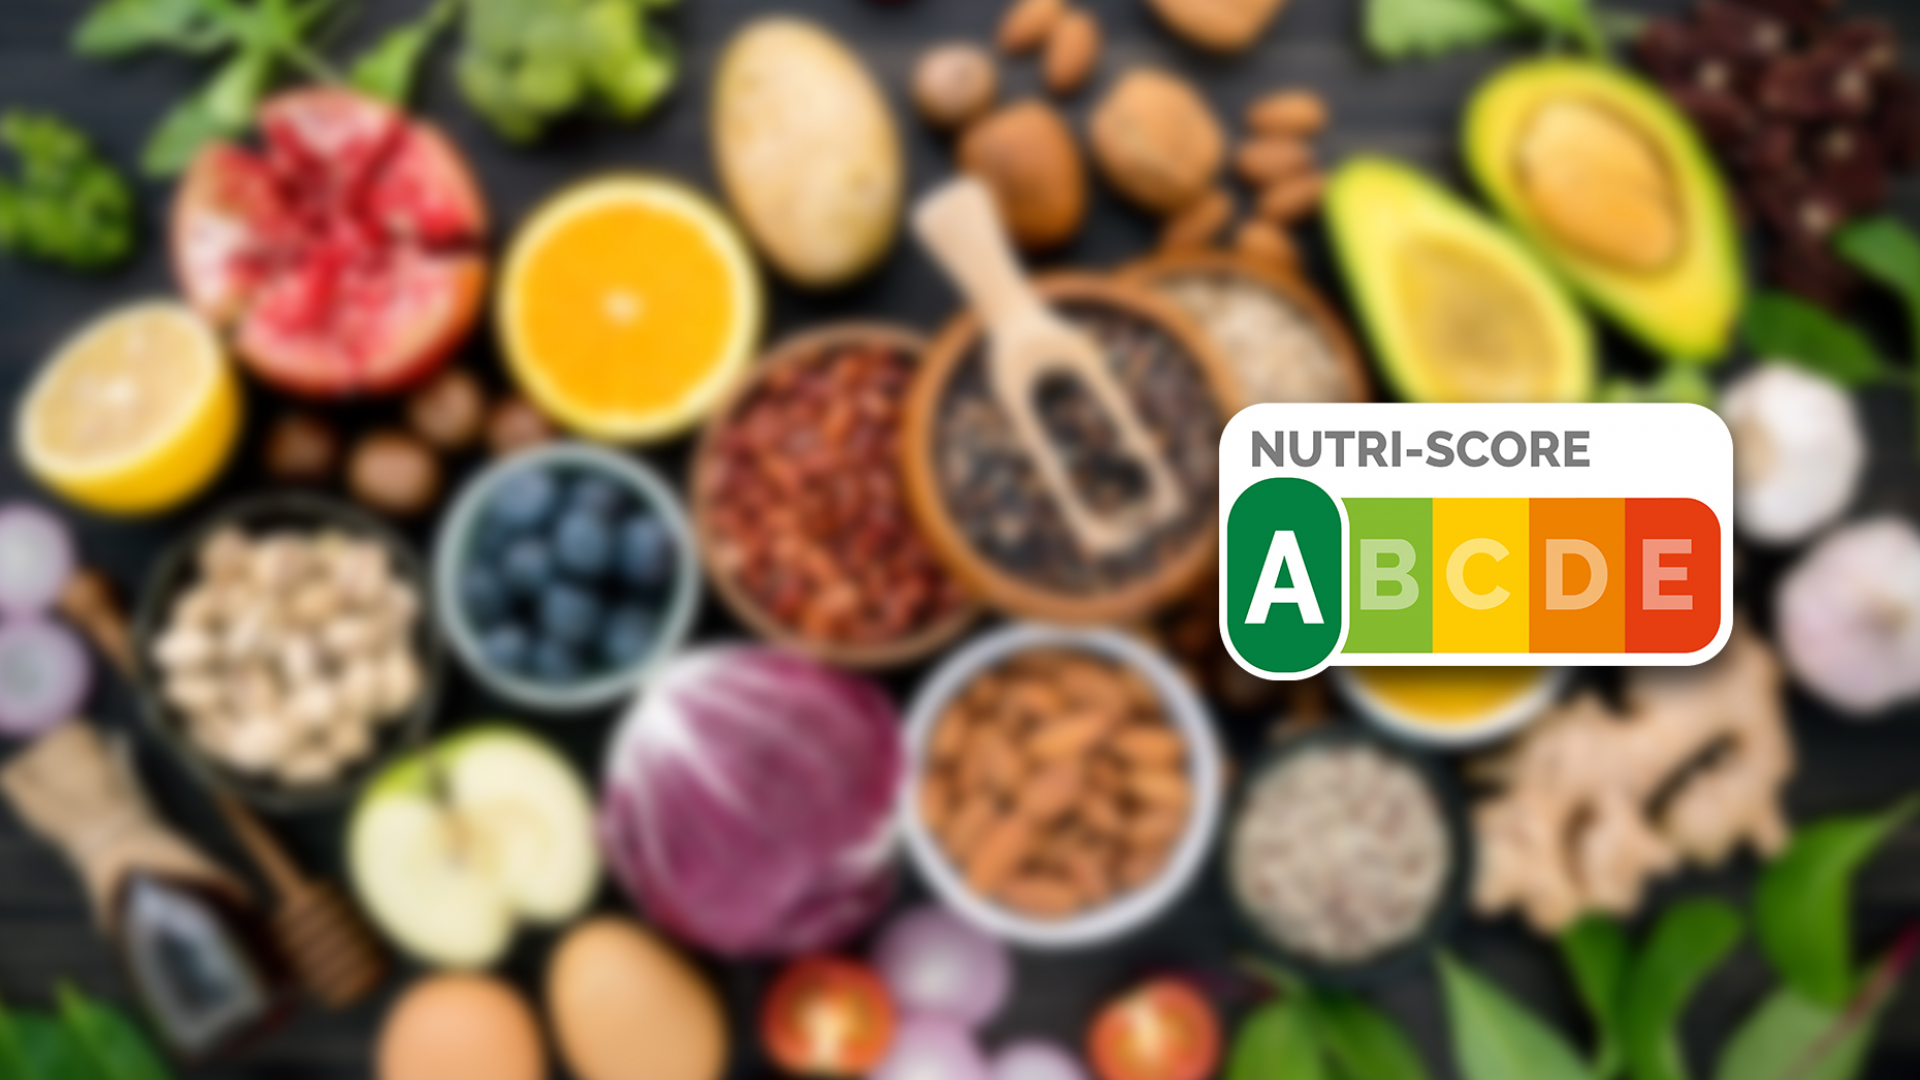 Nutri-Score: An easy way to choose the healthy option